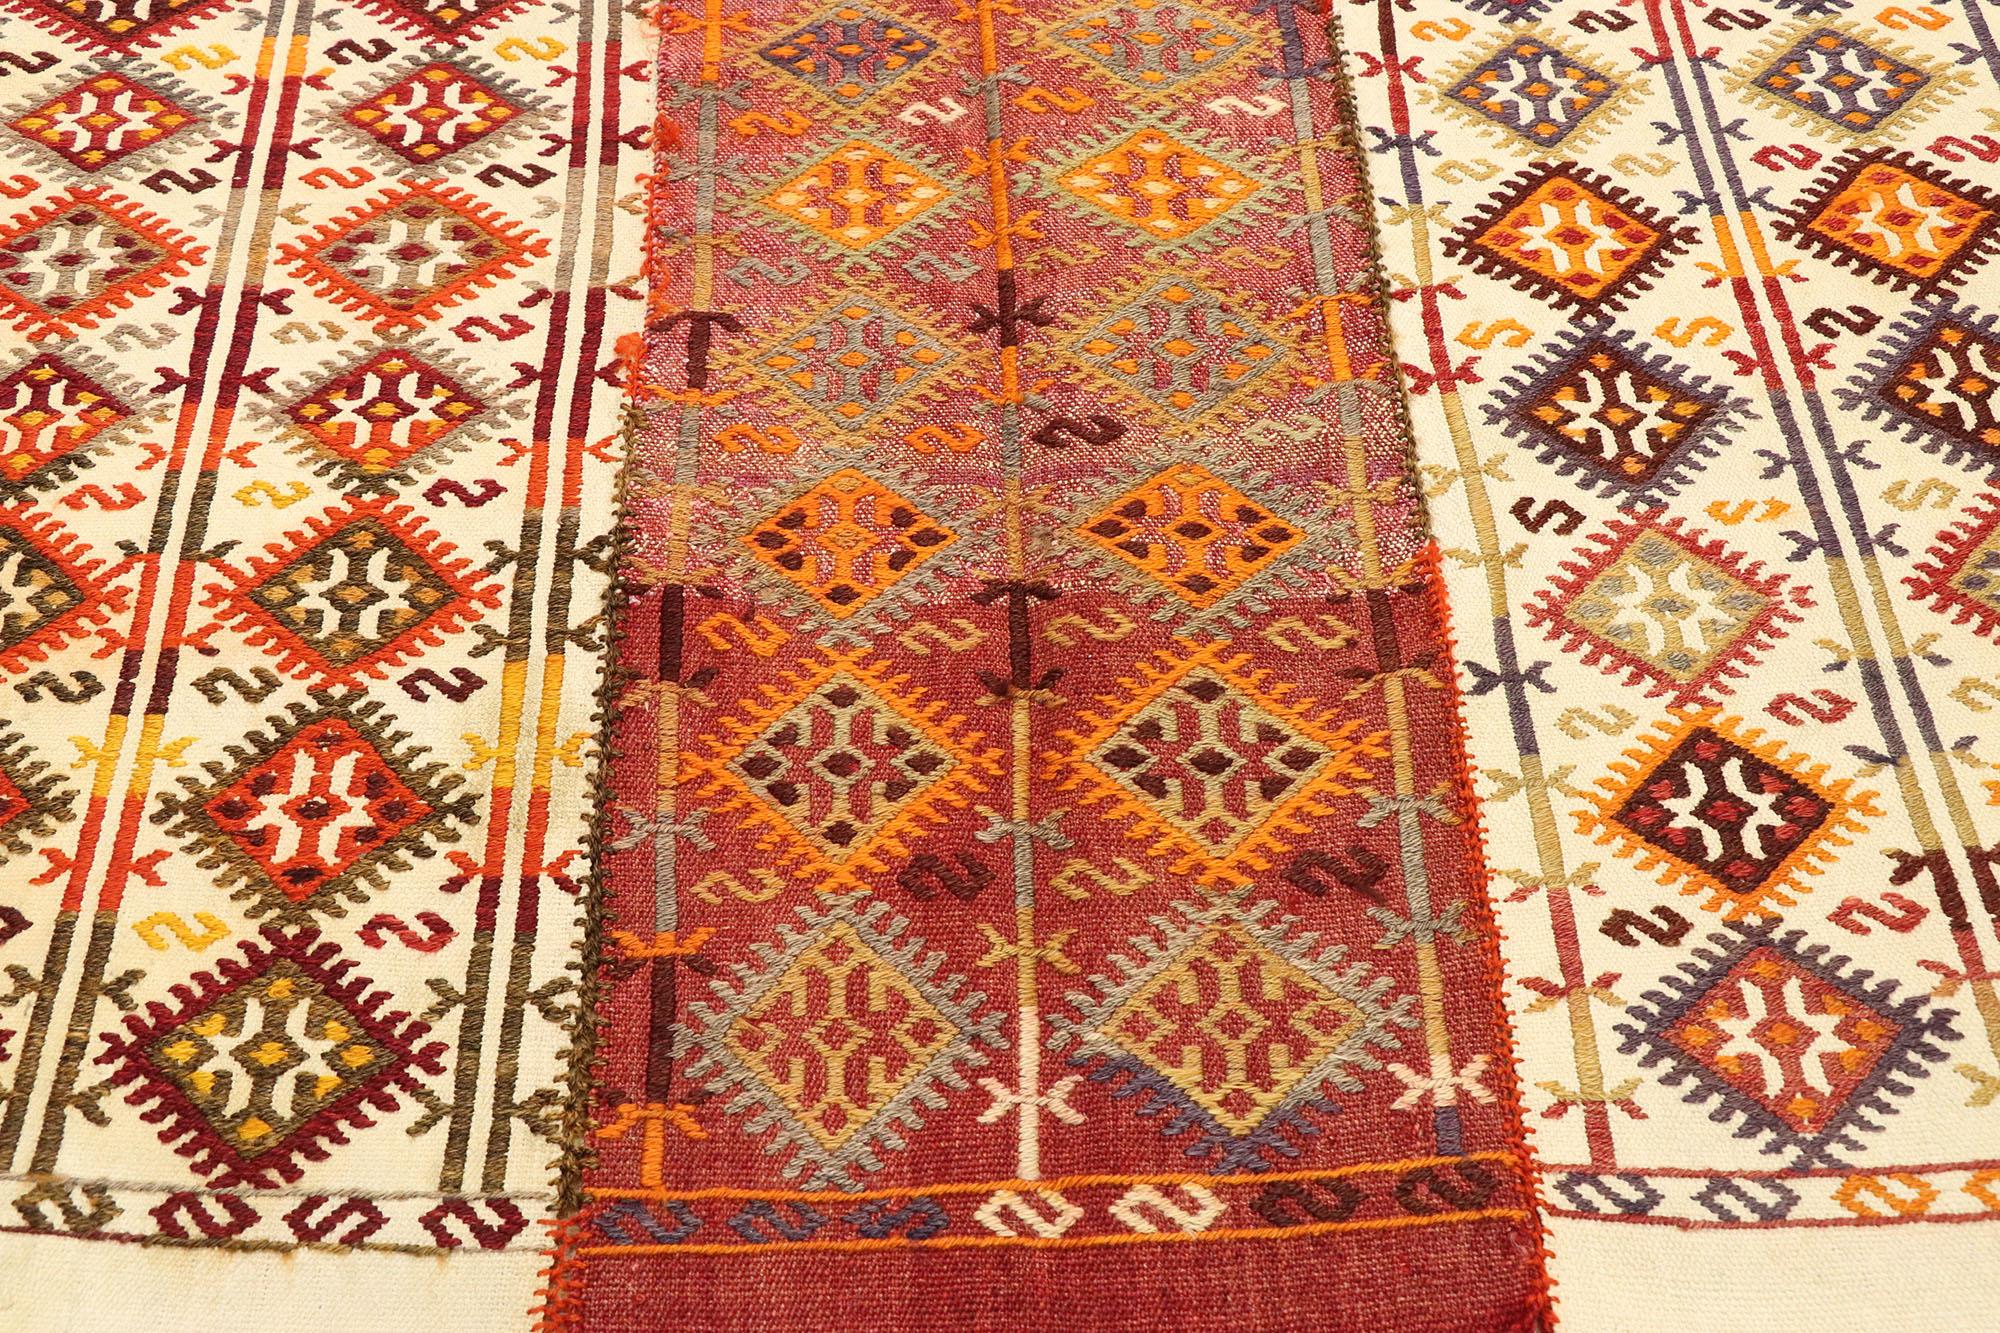 Hand-Woven Vintage Turkish Kilim Rug with Pacific Northwest Tribal Boho Chic Style For Sale